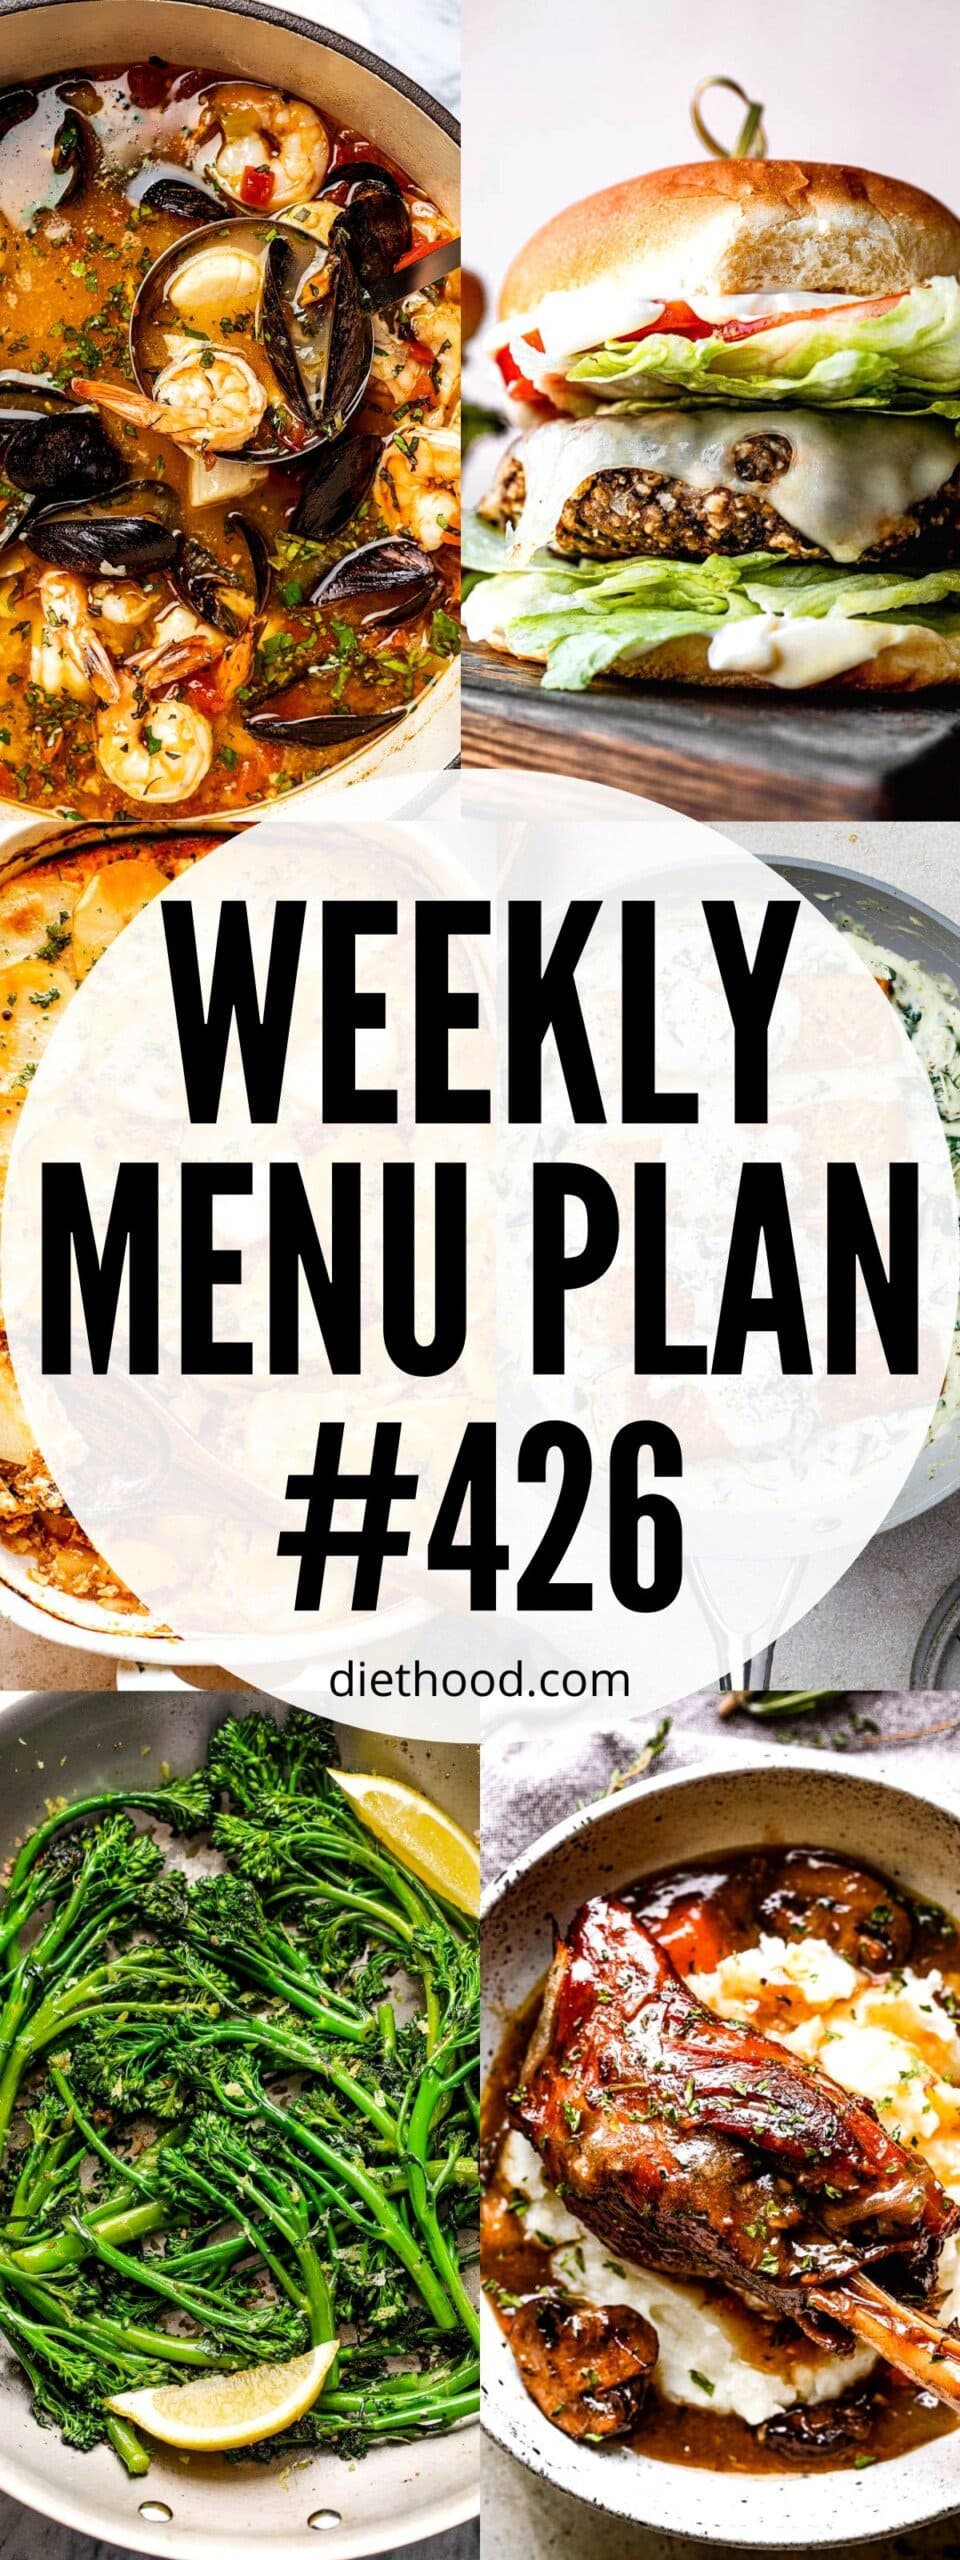 WEEKLY MENU PLAN 426 six pictures collage